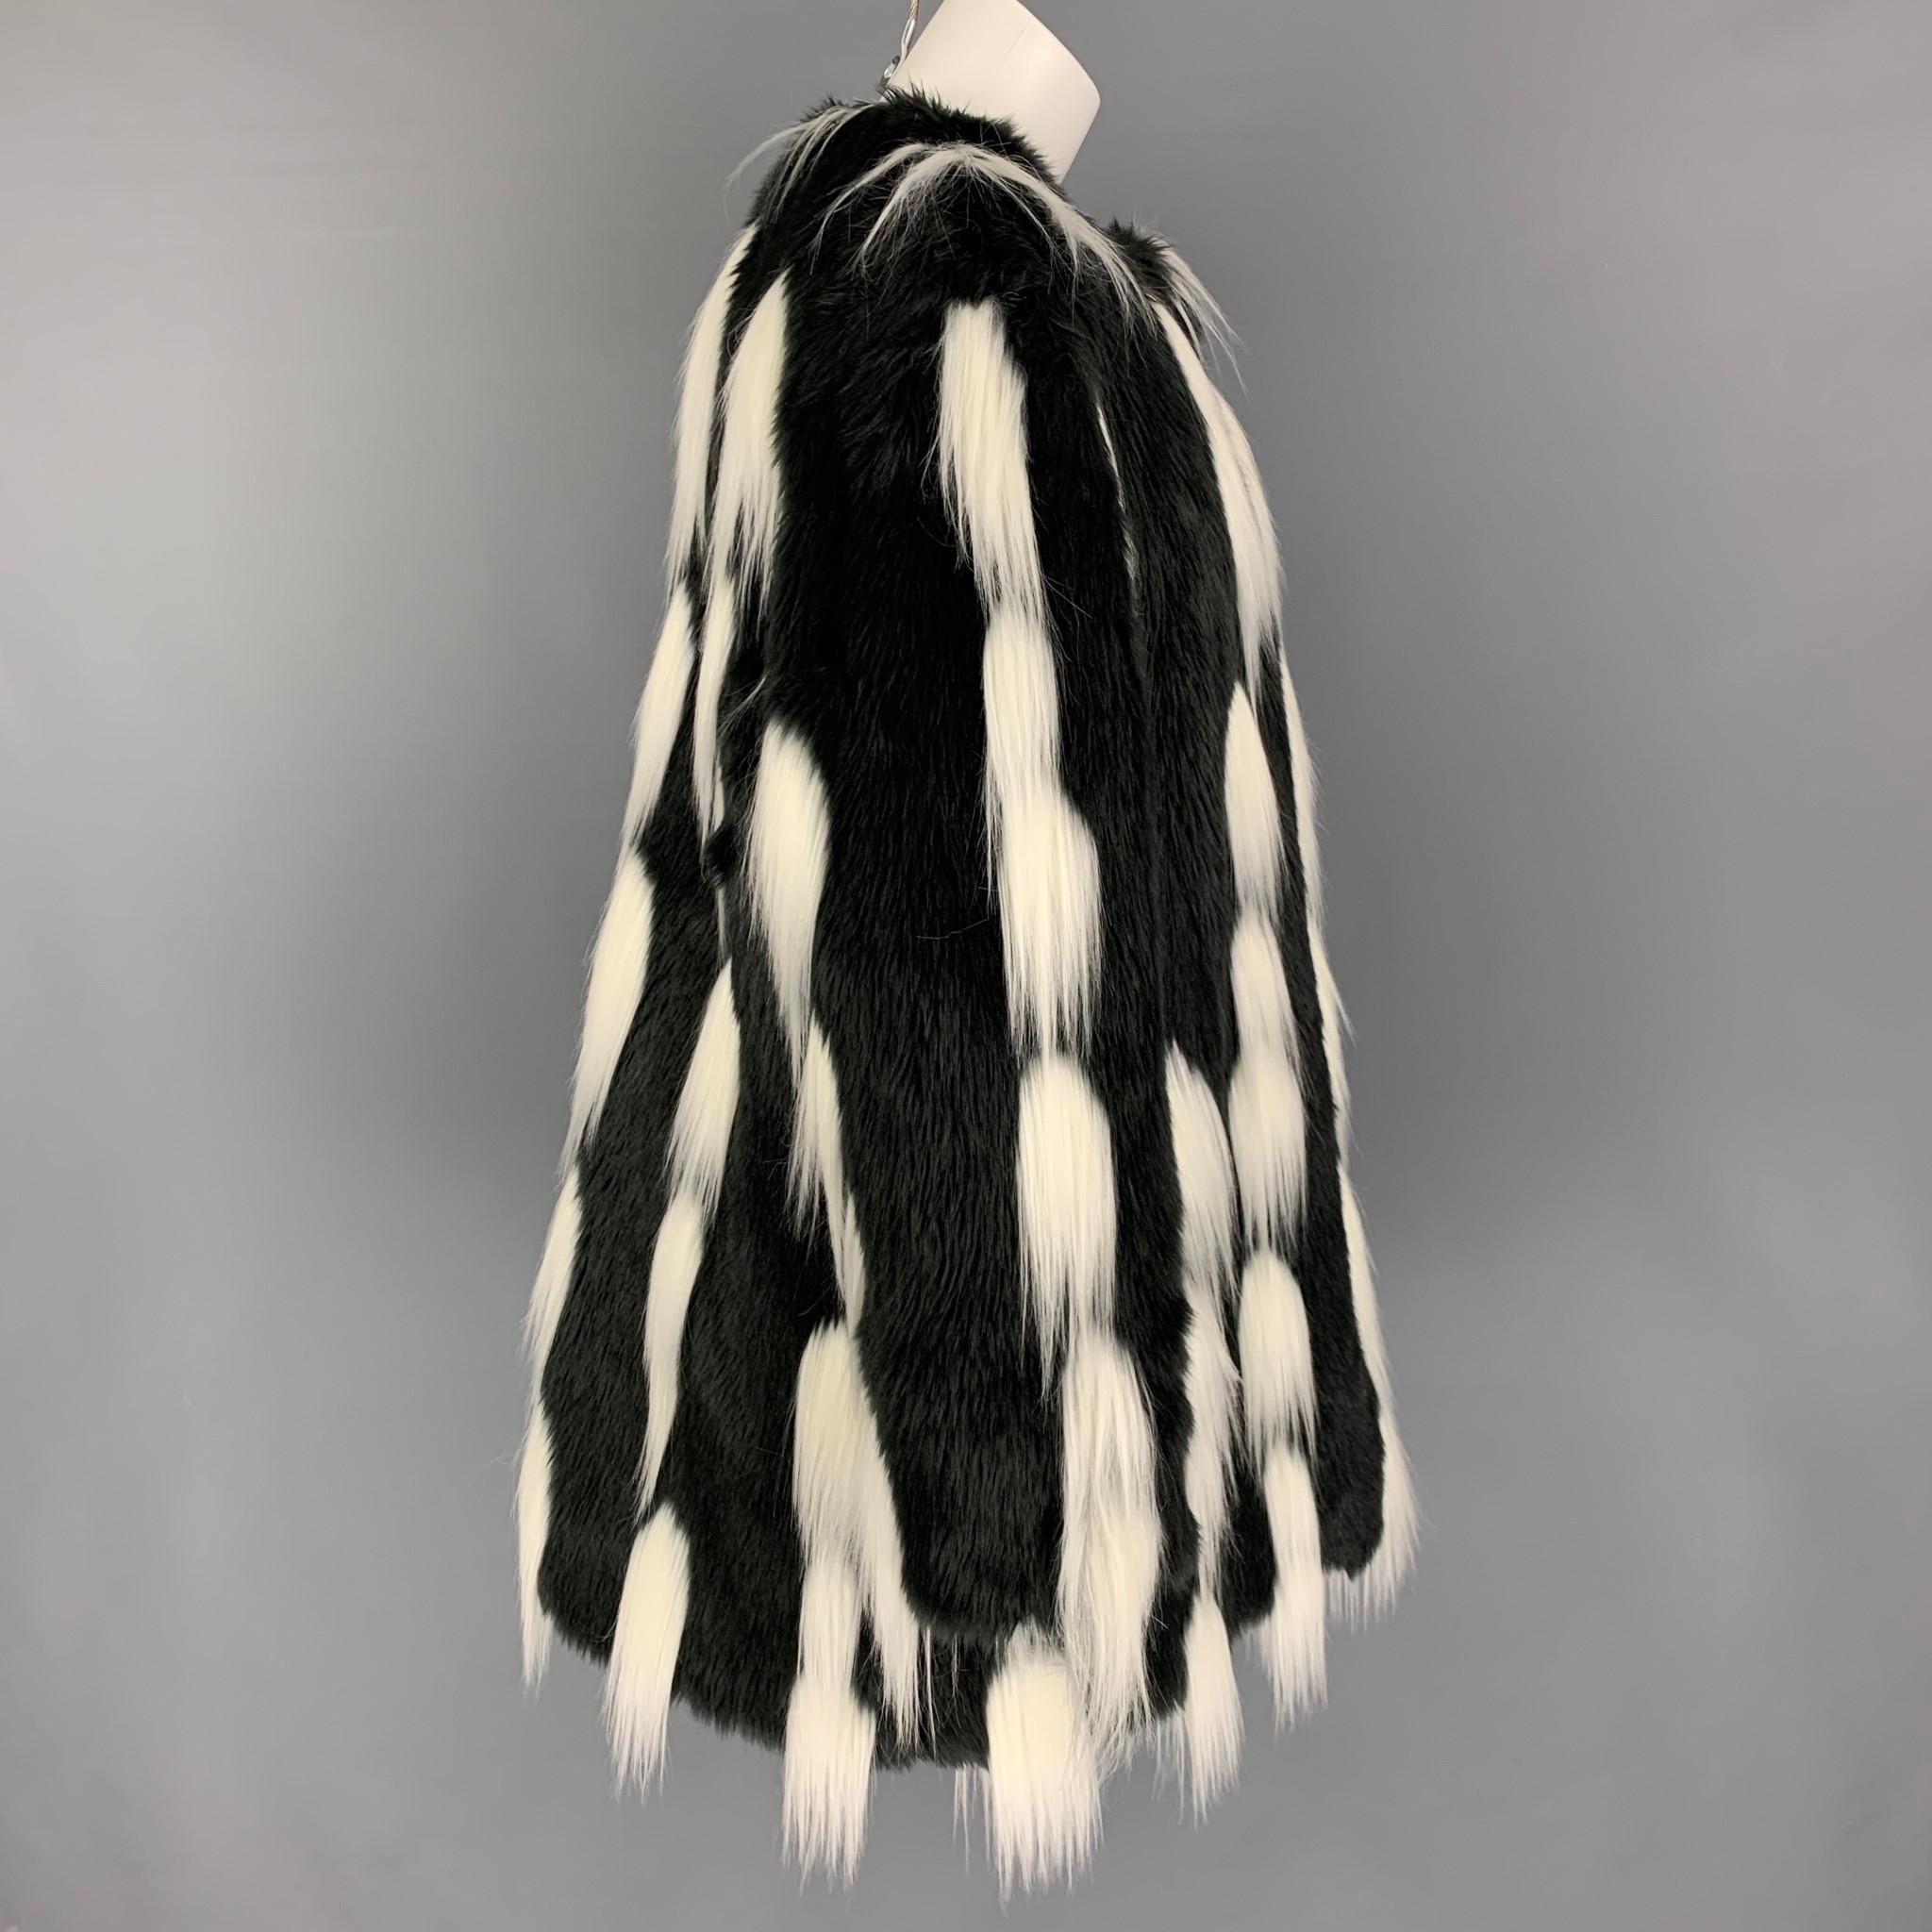 GIVENCHY AW 19 coat by Clare Waight Keller comes in a black & white monochrome animal print faux fur with a silk lining featuring a oversized fit, high neck, long sleeves, and a hook & loop closure. t’s cut to an oversized fit with a high neck and